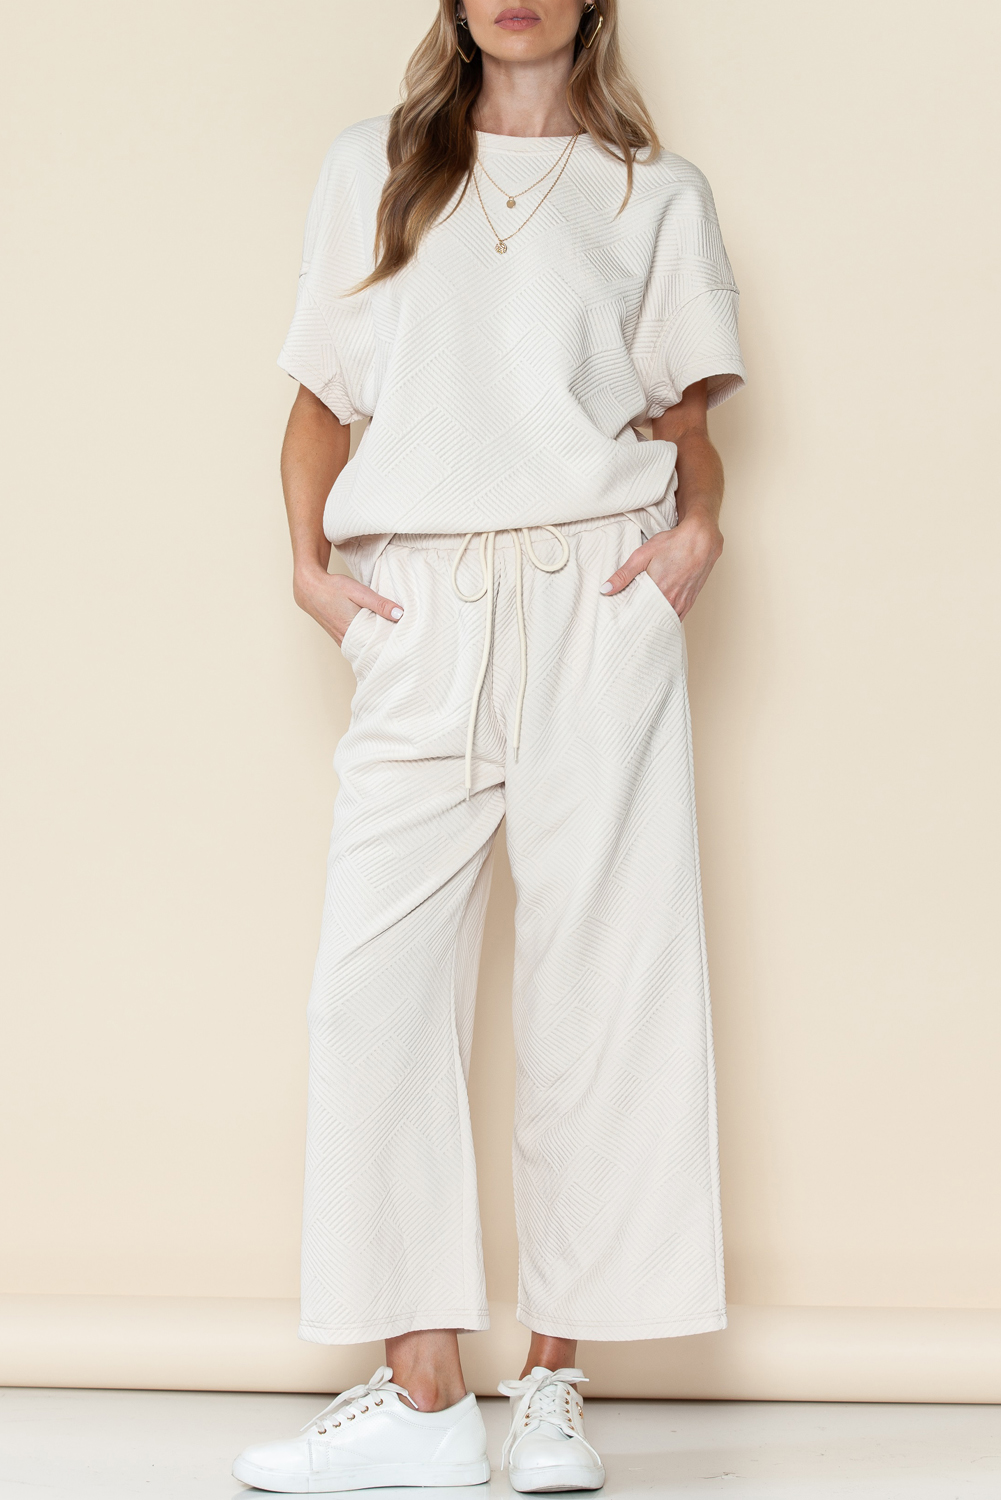 Shewin Wholesale Western Clothes Bright White Textured Loose Fit T Shirt and Drawstring PANTS Set